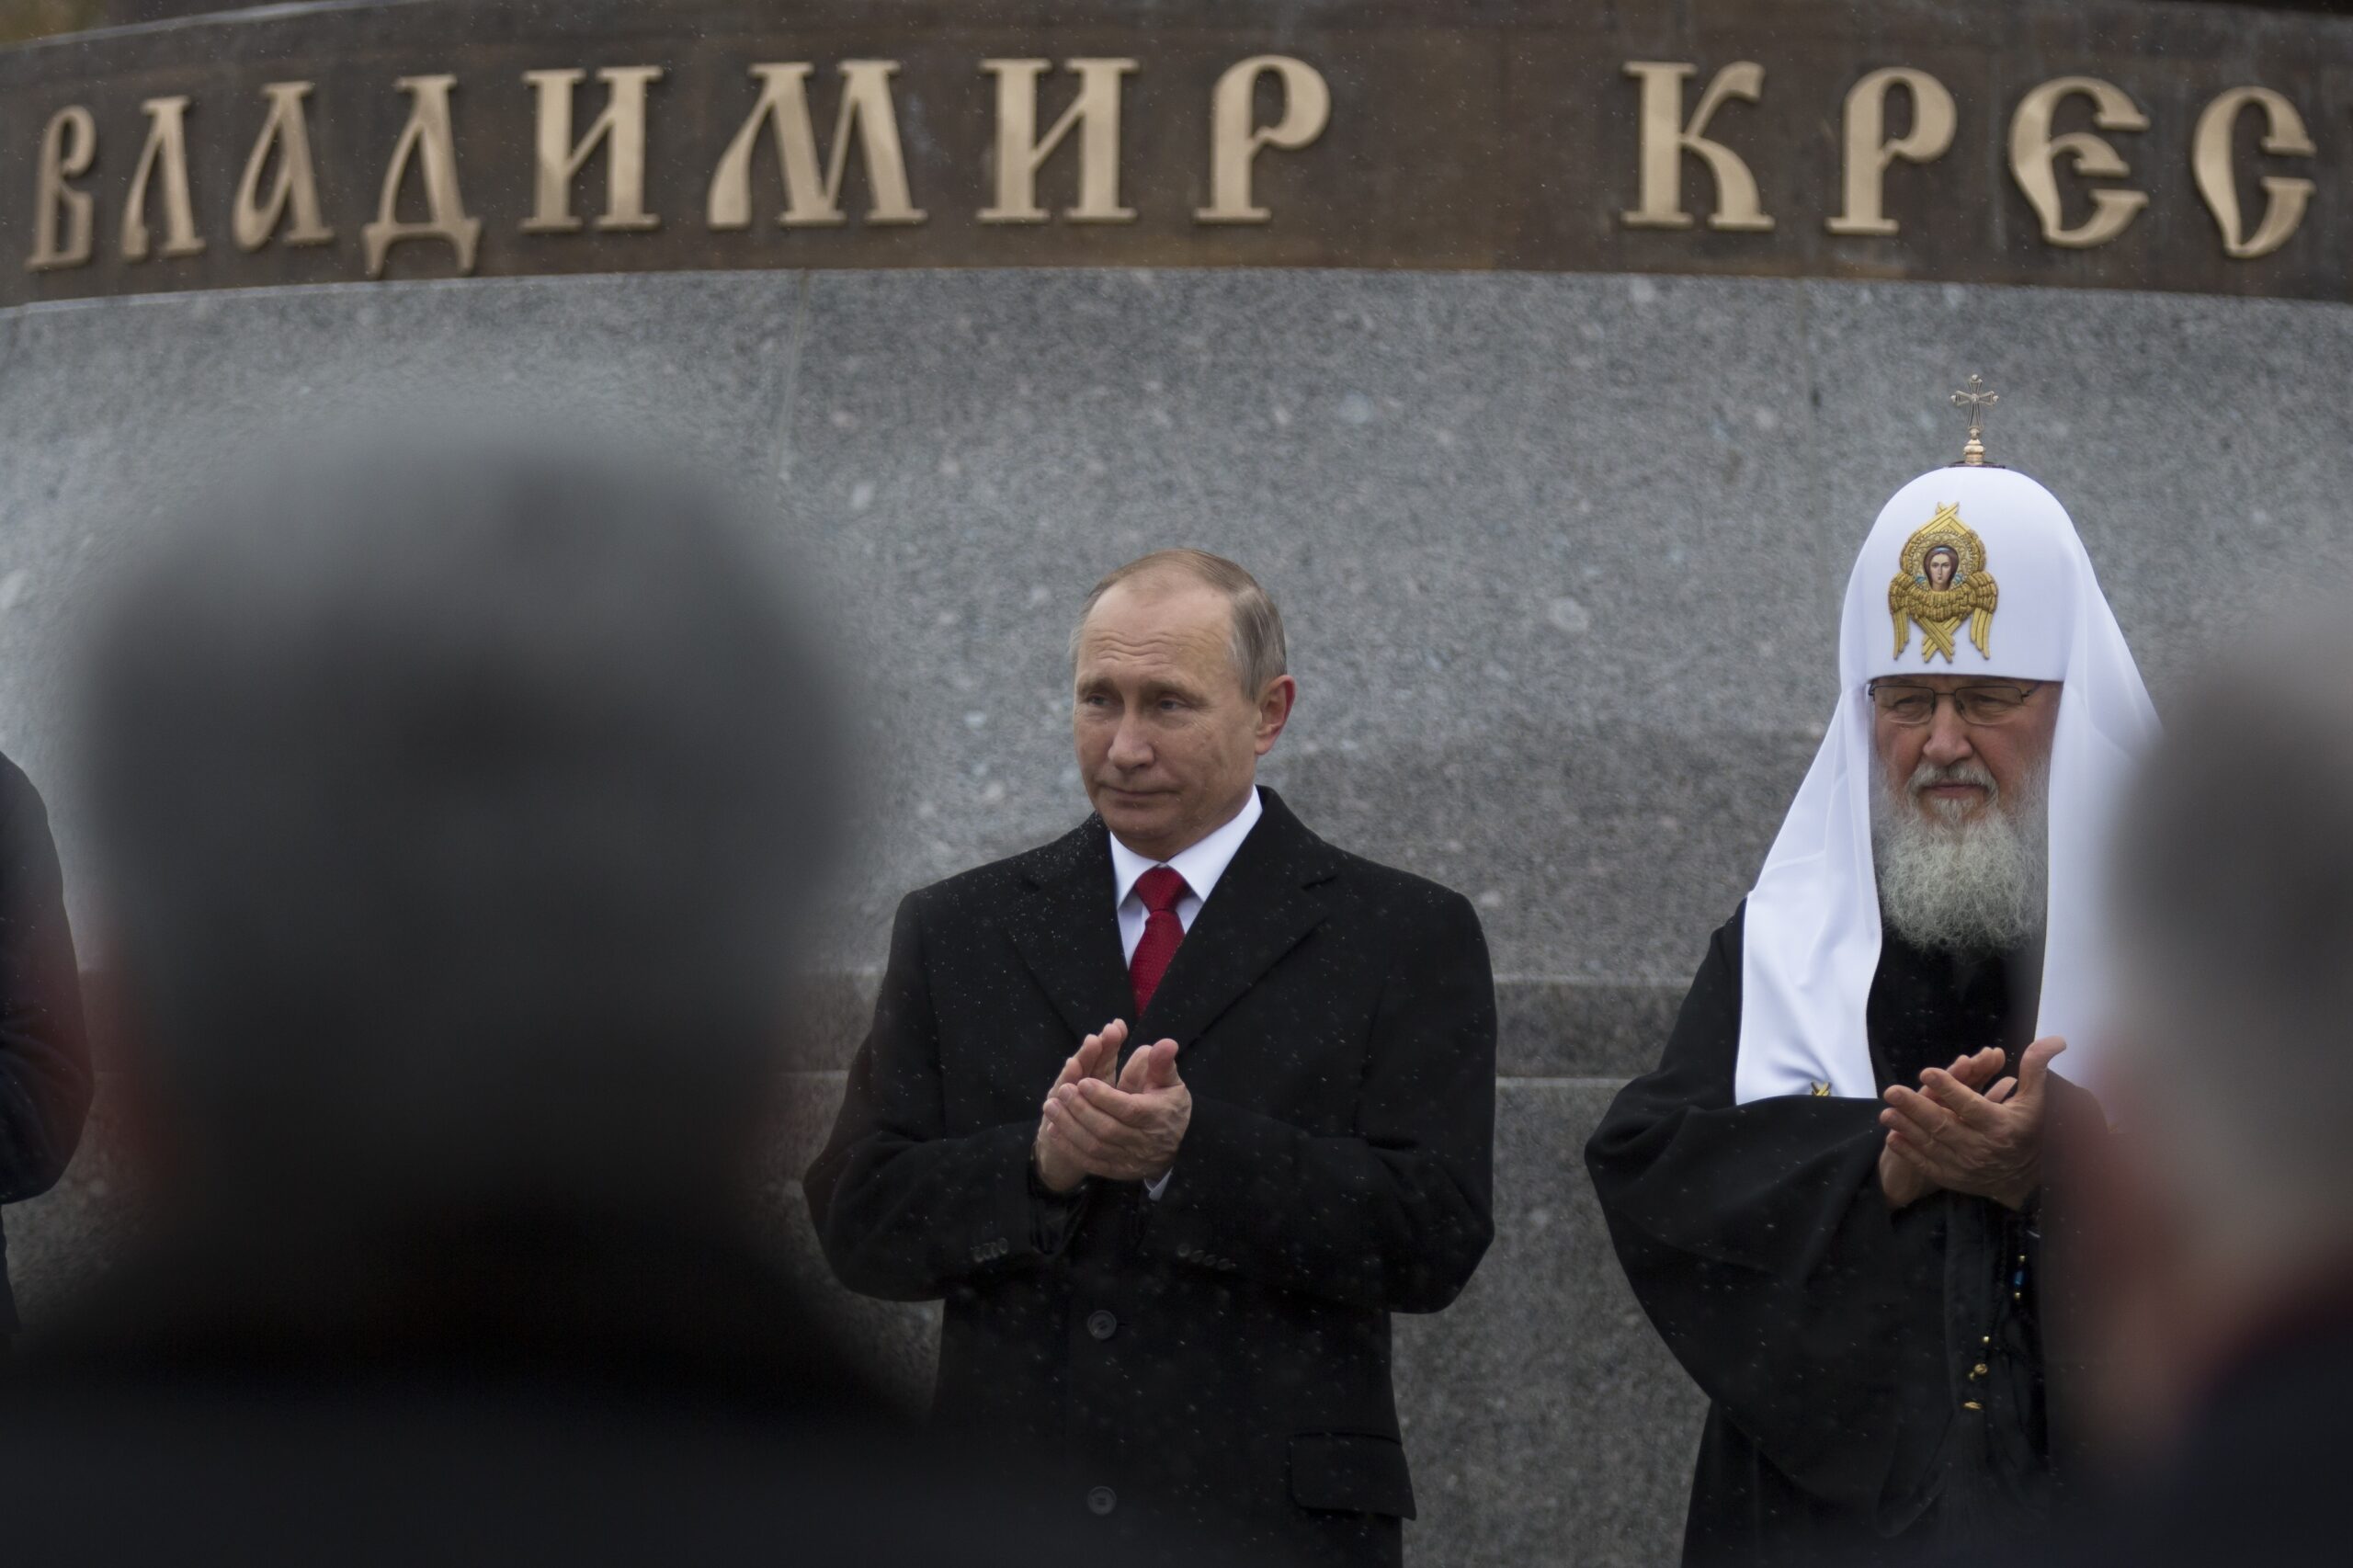 Russian President Vladimir Putin, center, and Russian Orthodox Patriarch Kirill applaud during the unveiling ceremony of a monument to Vladimir the Great on the National Unity Day outside the Kremlin in Moscow, Russia, Friday, Nov. 4, 2016. President Vladimir Putin has led ceremonies launching a large statue outside the Kremlin to a 10th-century prince of Kiev who is credited with making Orthodox Christianity the official faith of Russia, Ukraine and Belarus. (AP Photo/Alexander Zemlianichenko)